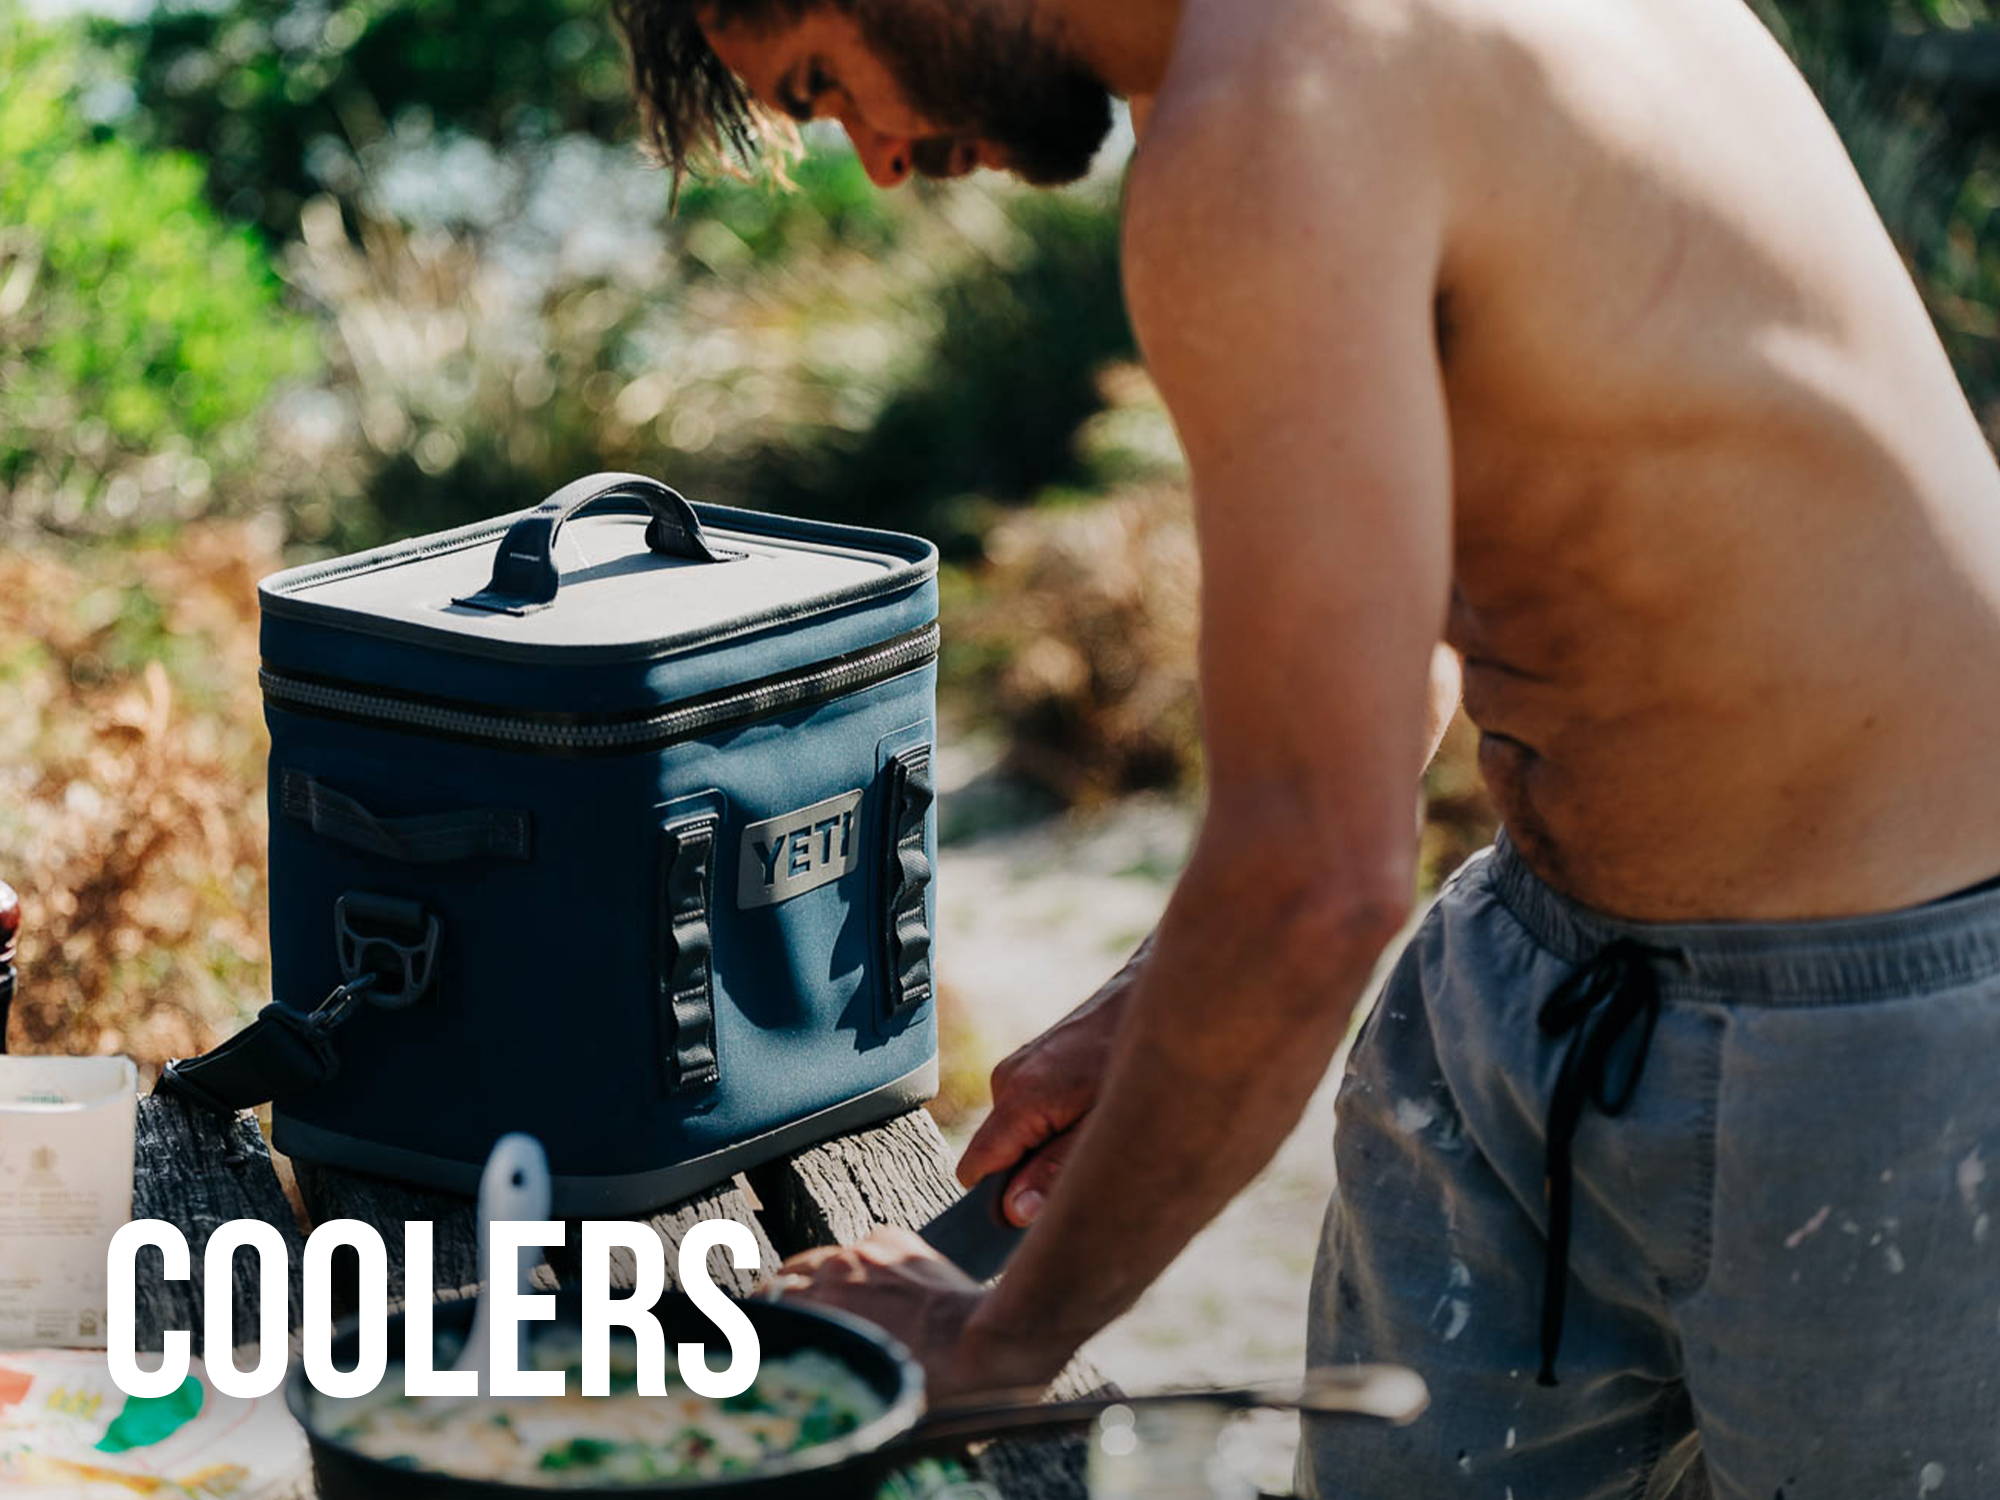 Man in swim trunks preparing food at the beach from Yeti soft cooler